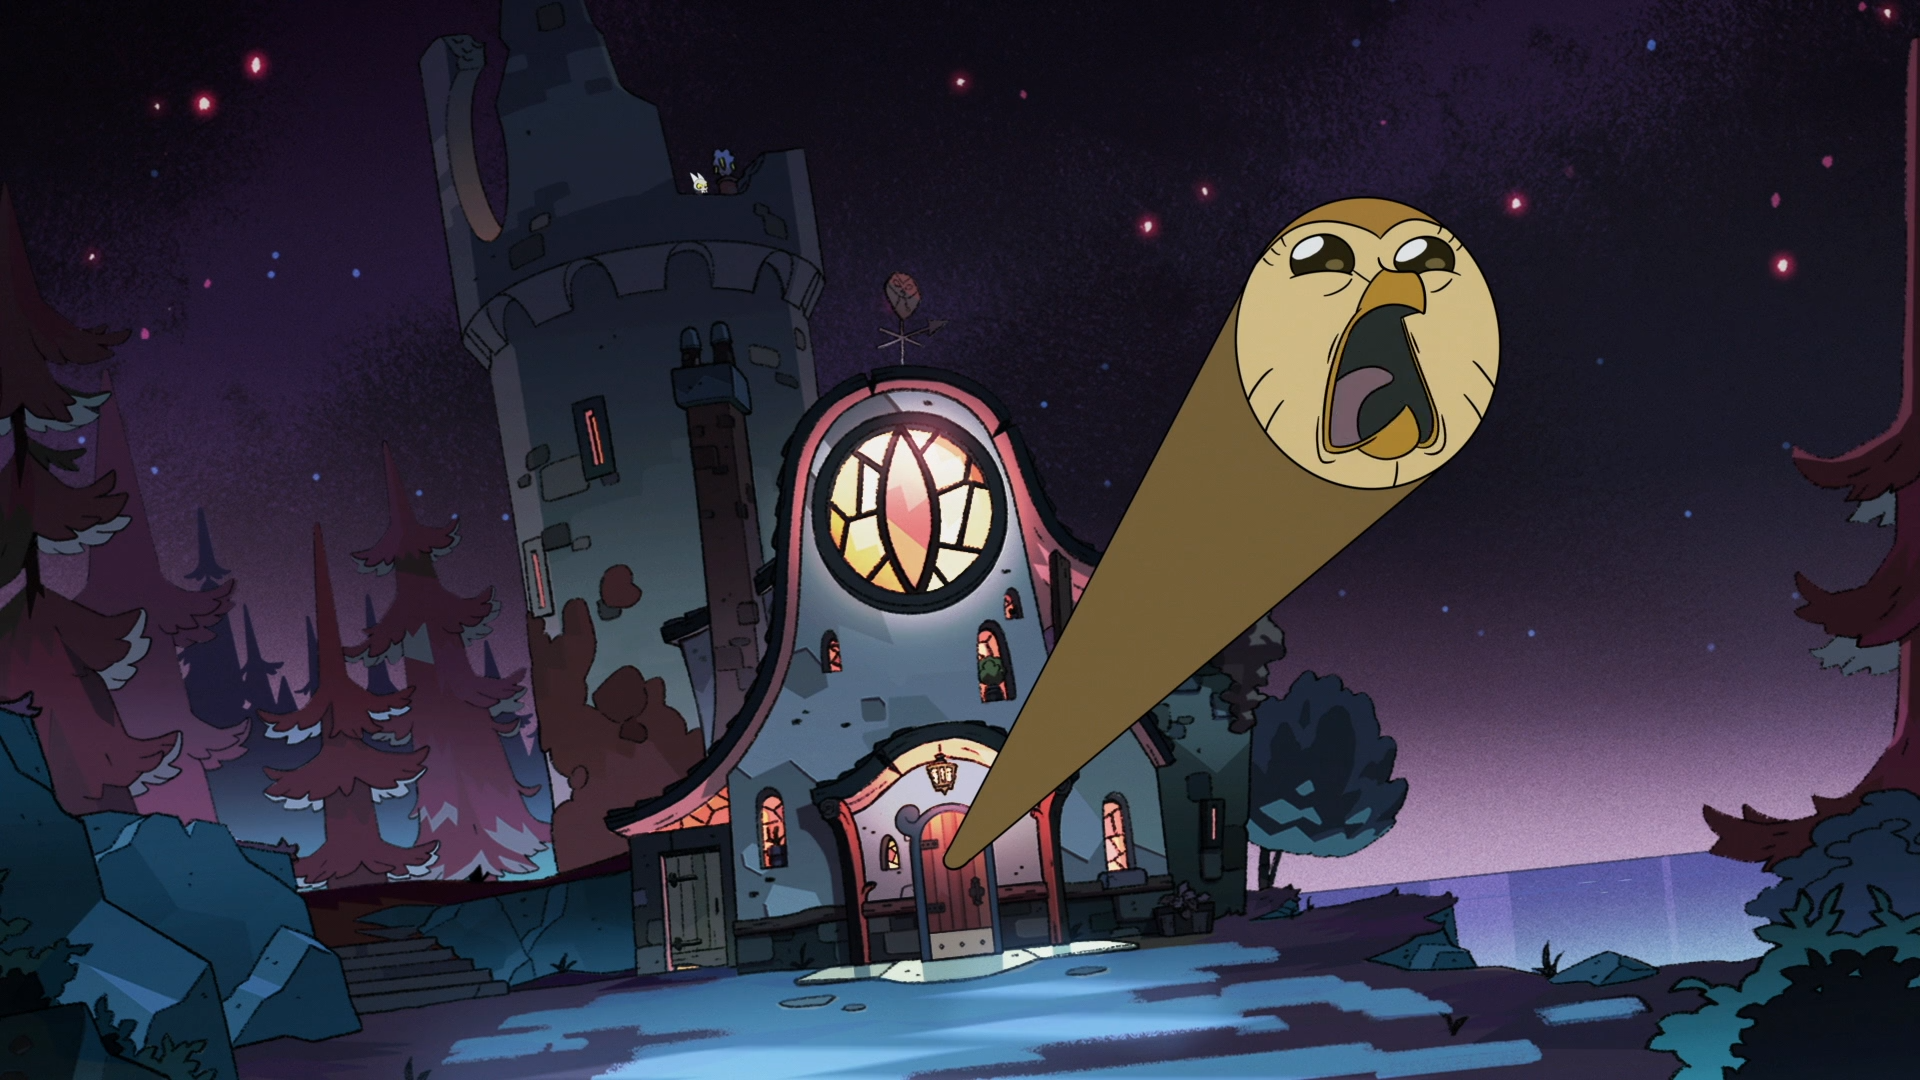 Disney Channel's 'The Owl House': It's a Hoot!